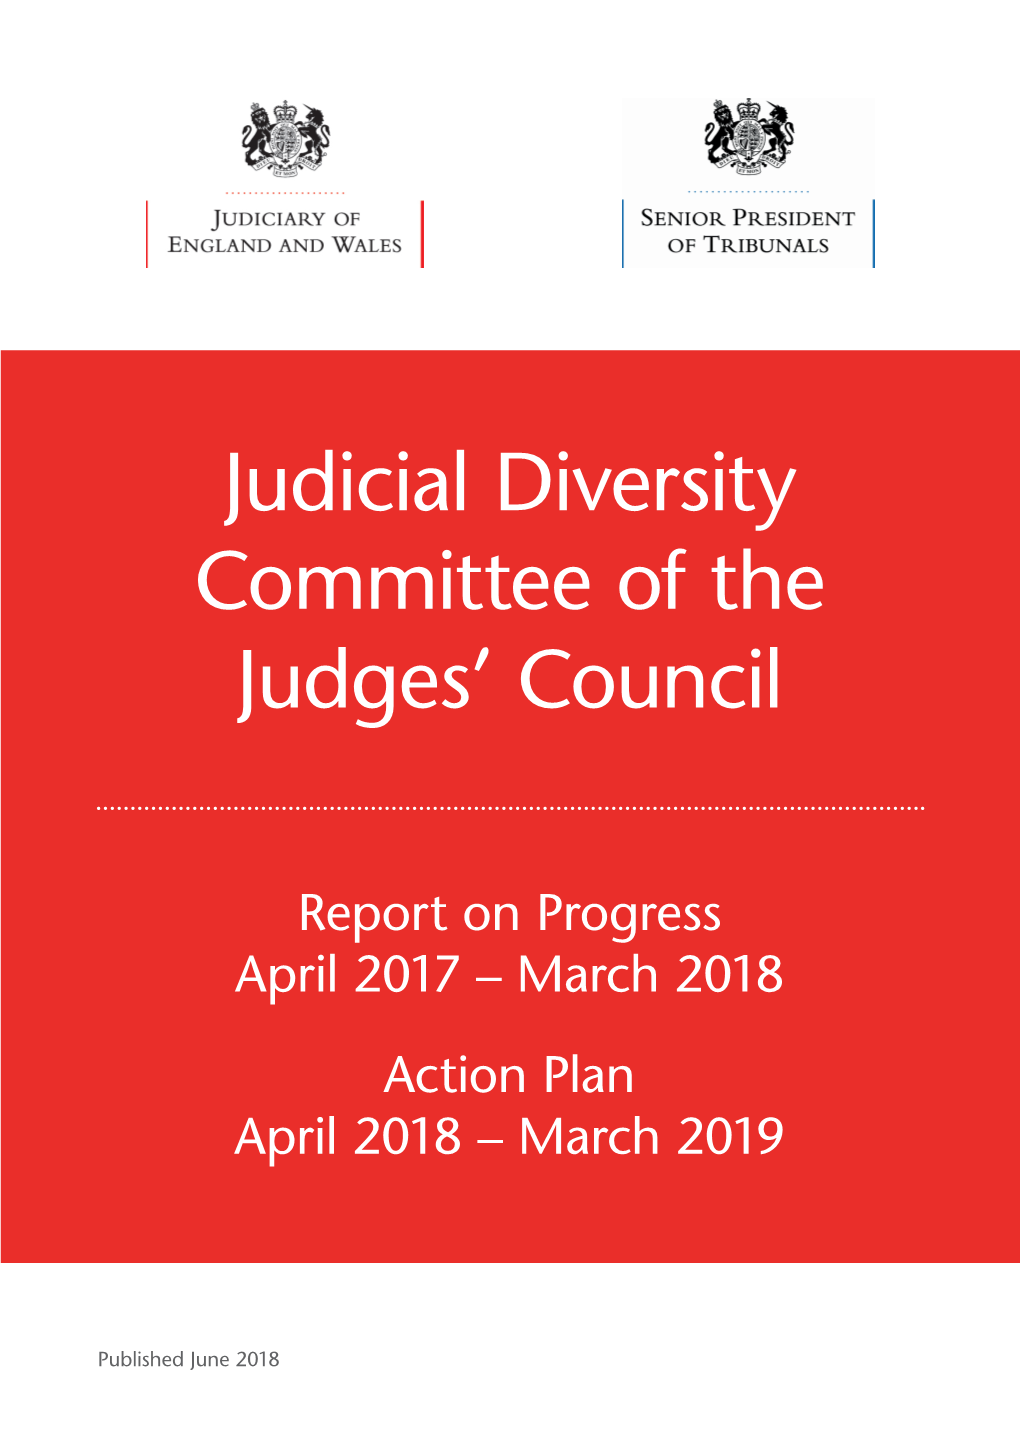 Judicial Diversity Committee of the Judges’ Council